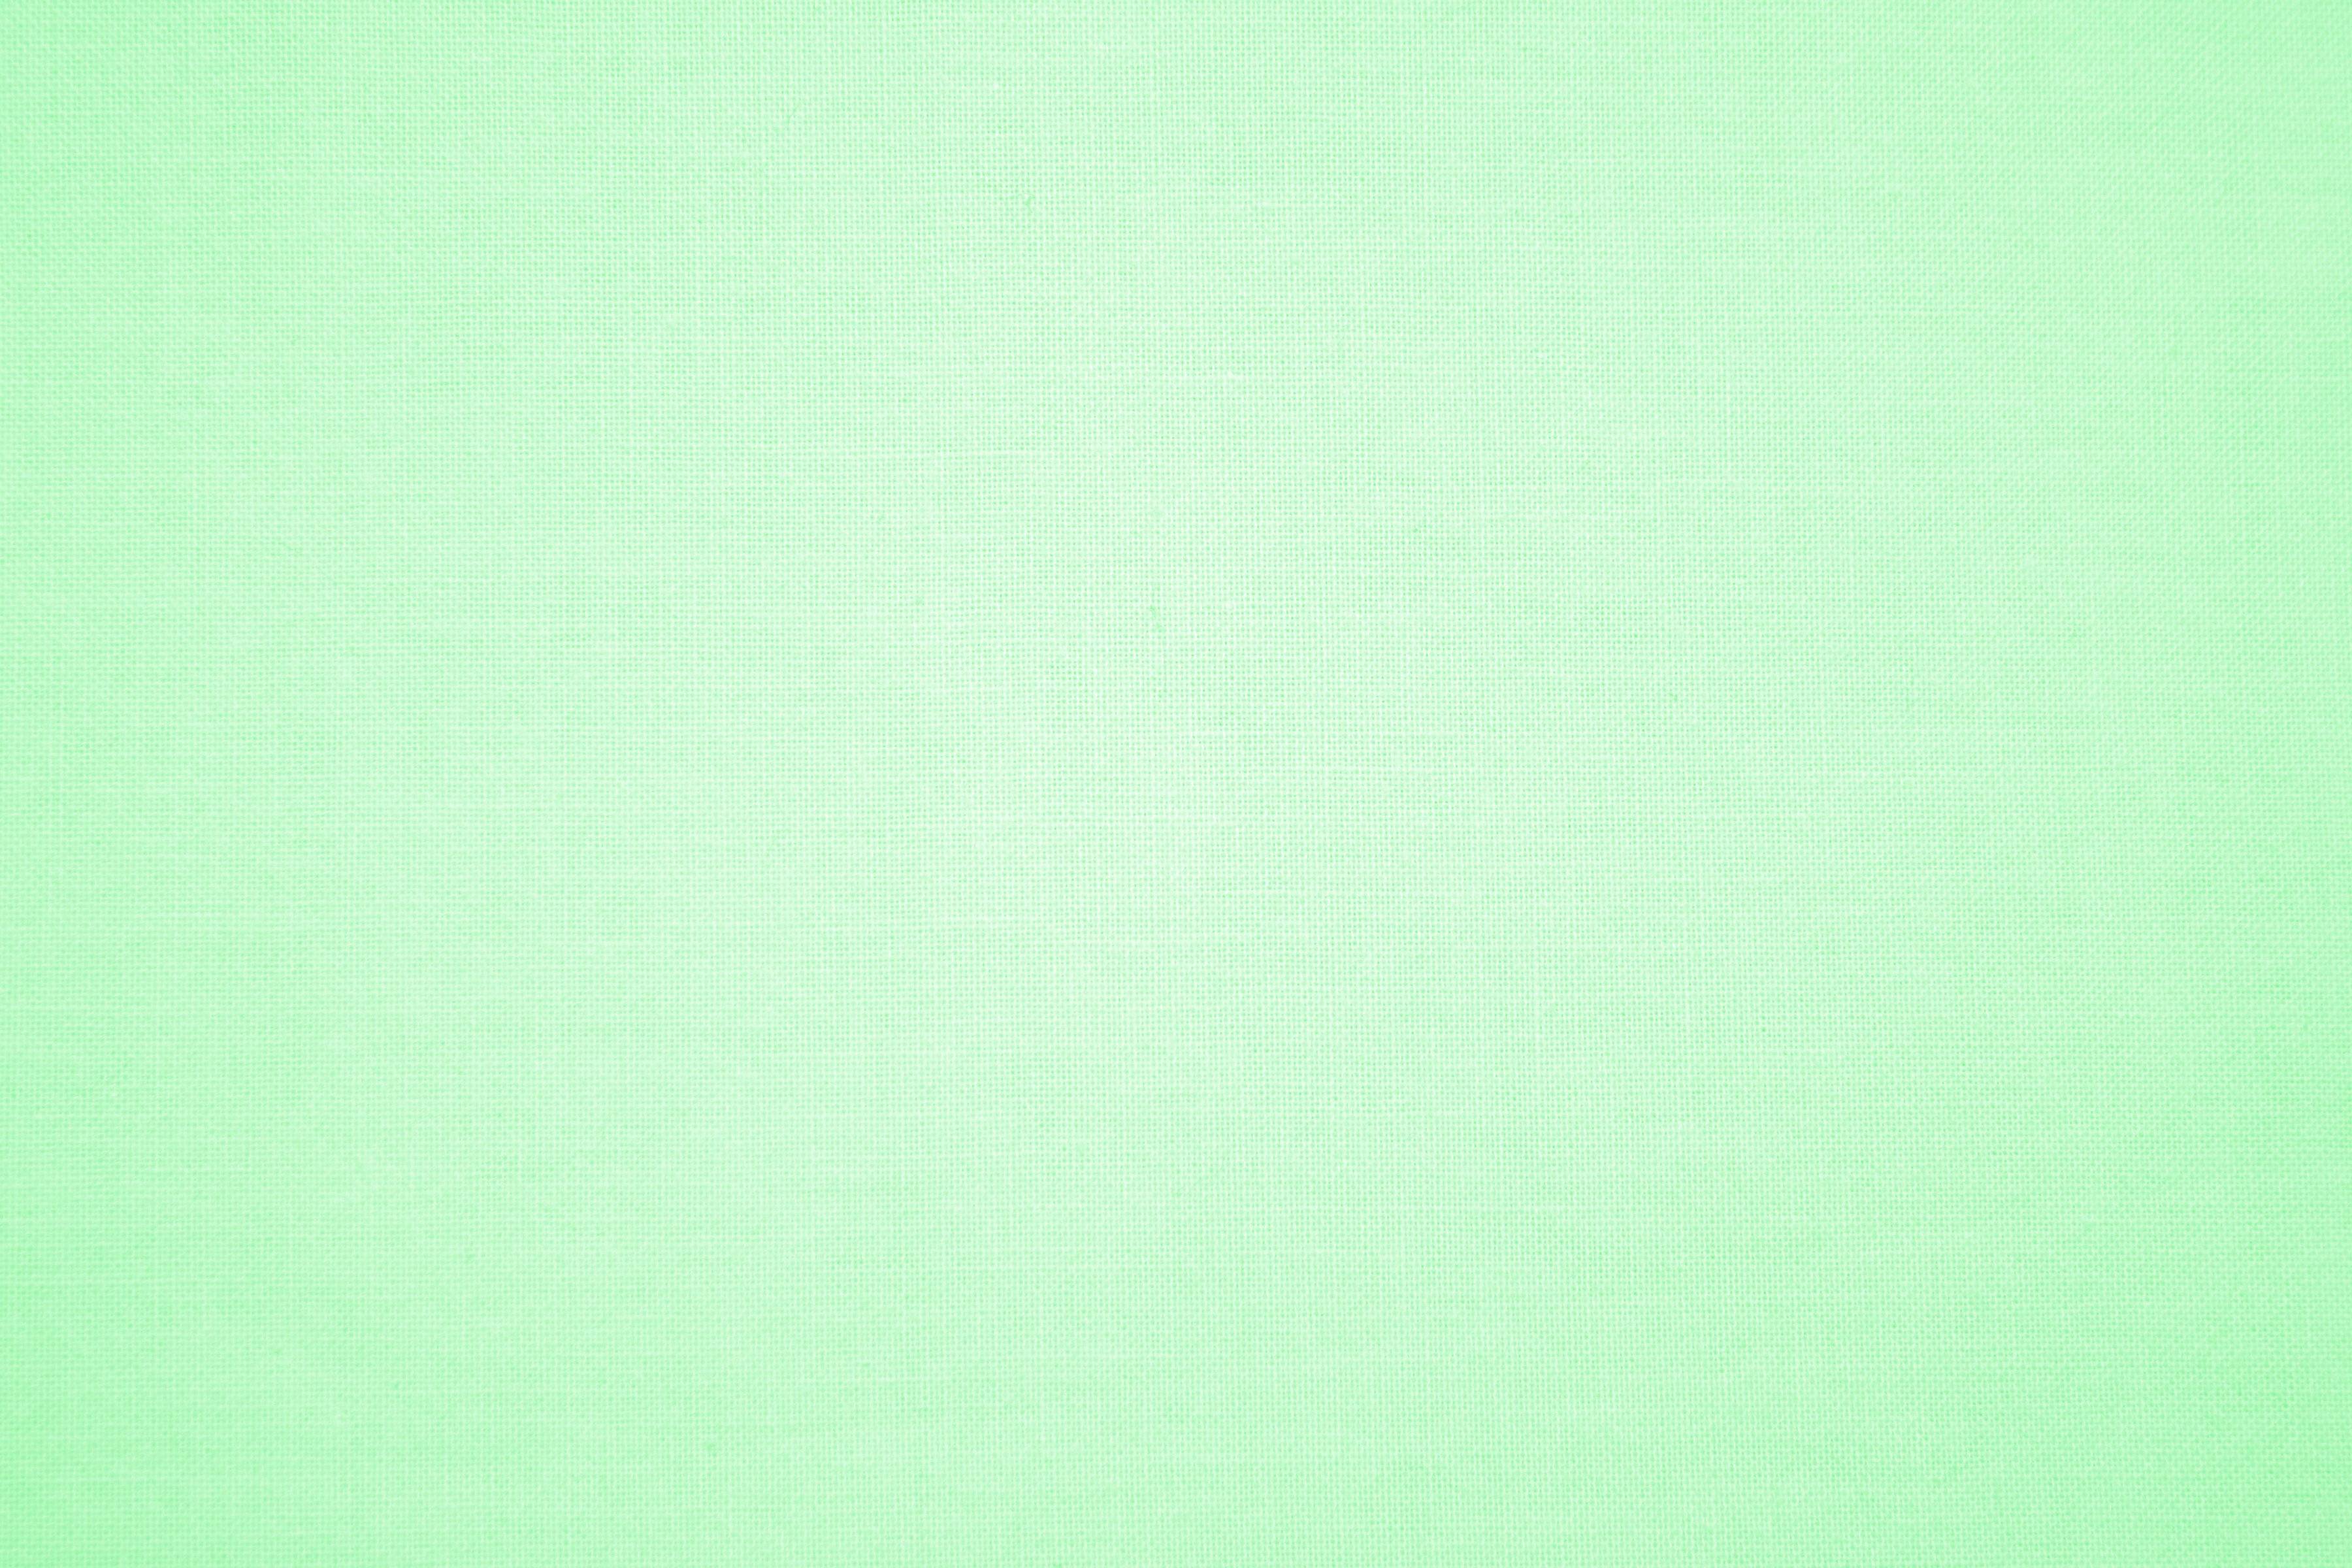 Pastel Green Canvas Fabric Texture Picture. Free Photograph